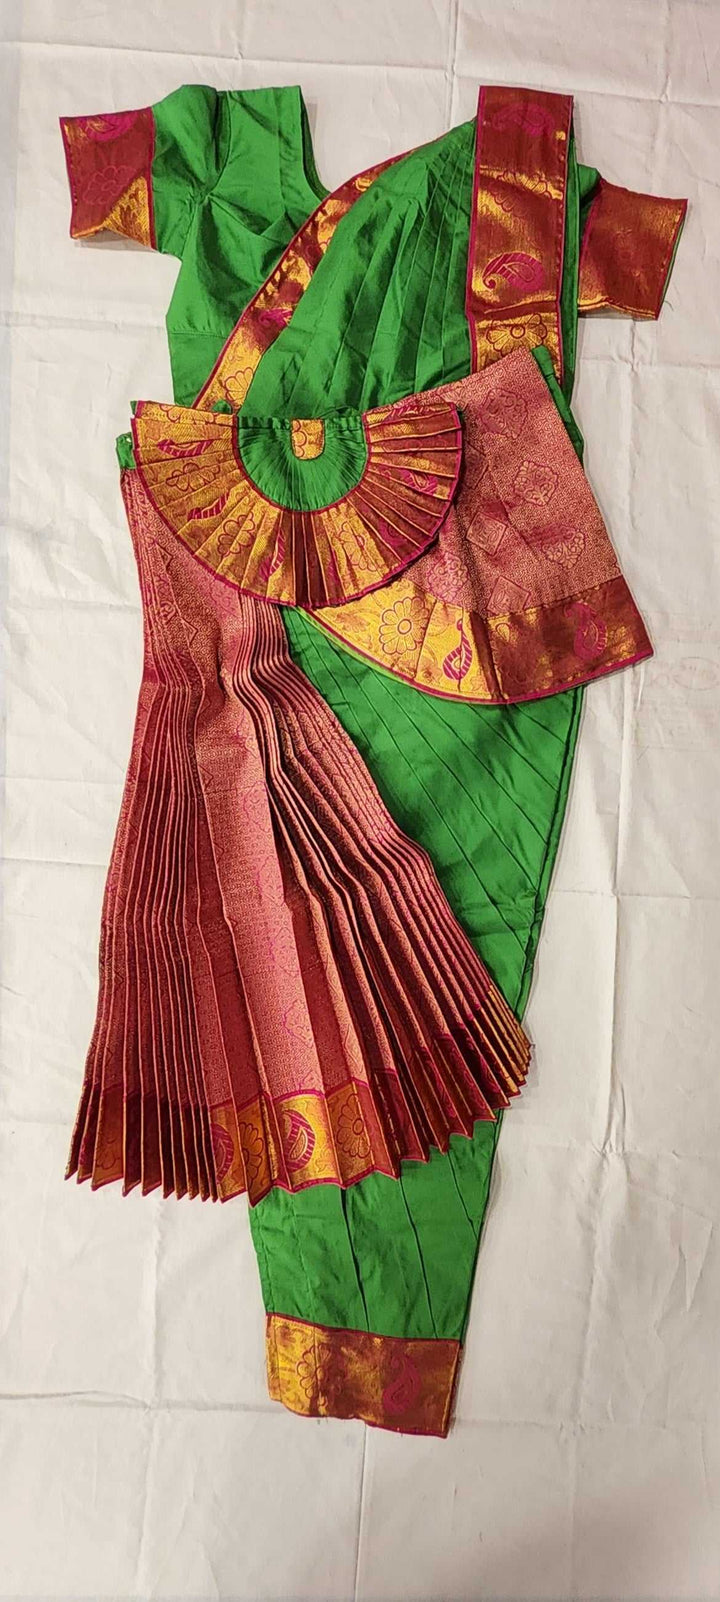 Bharatnatyam Dress | Parrot Green with Pink | Silk cotton with contrast Border | Readymade Dance Costume